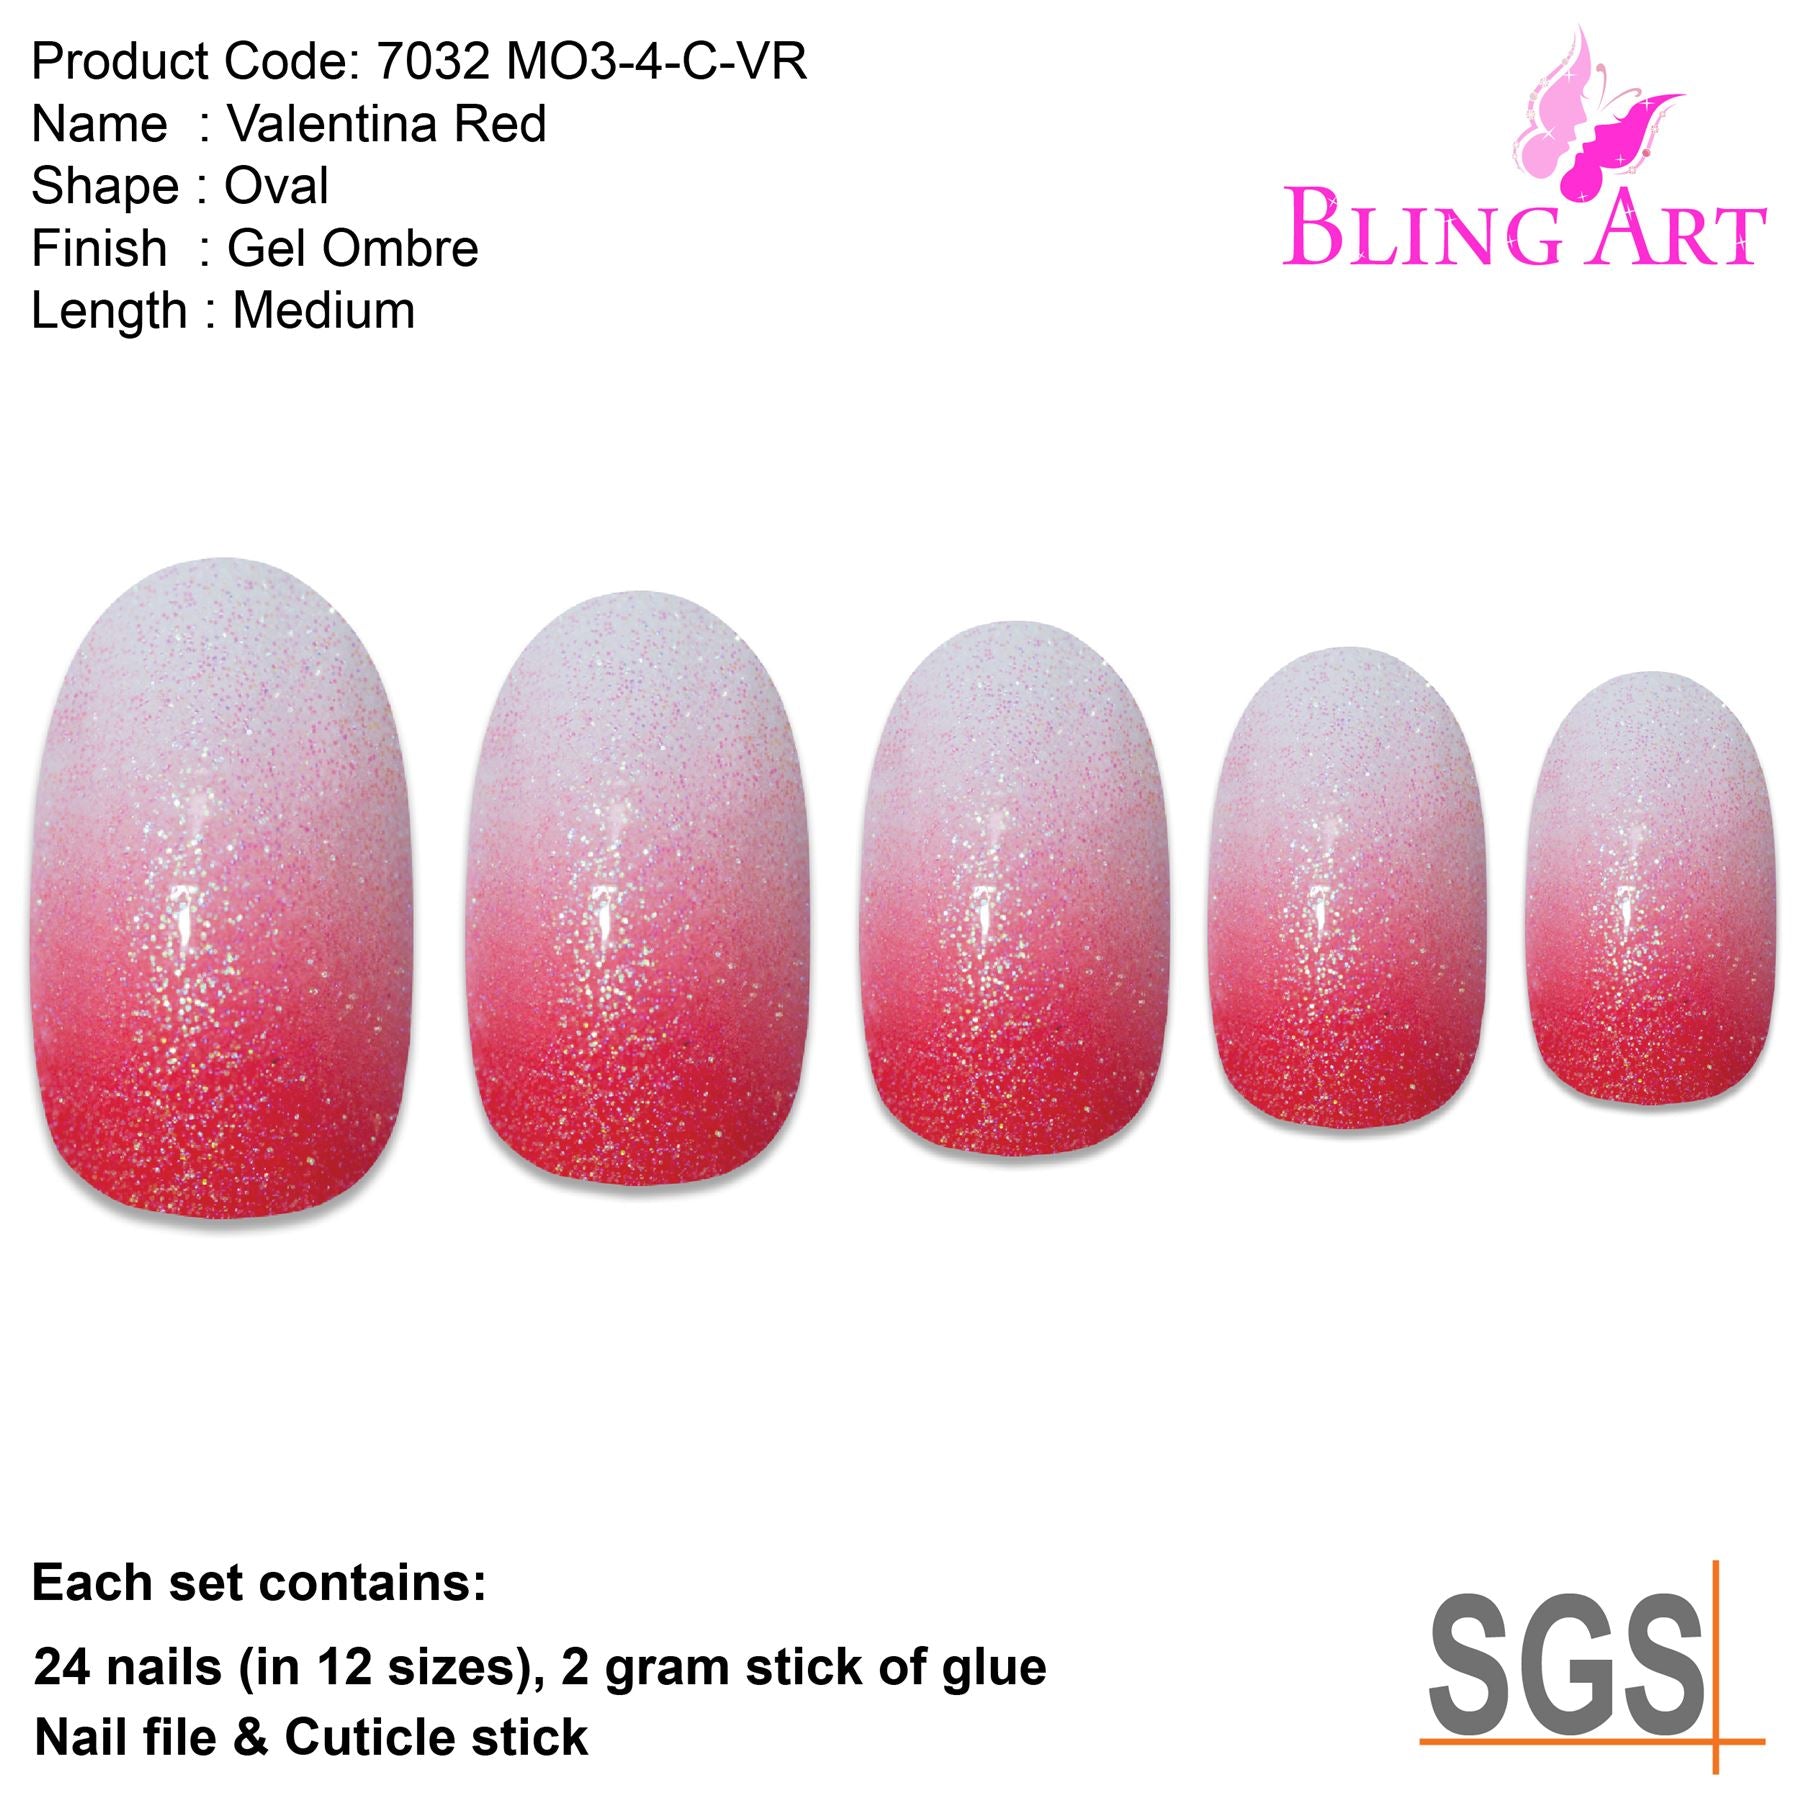 False Nails by Bling Art Red Gel Ombre Oval Medium Fake Acrylic 24 Tips Glue